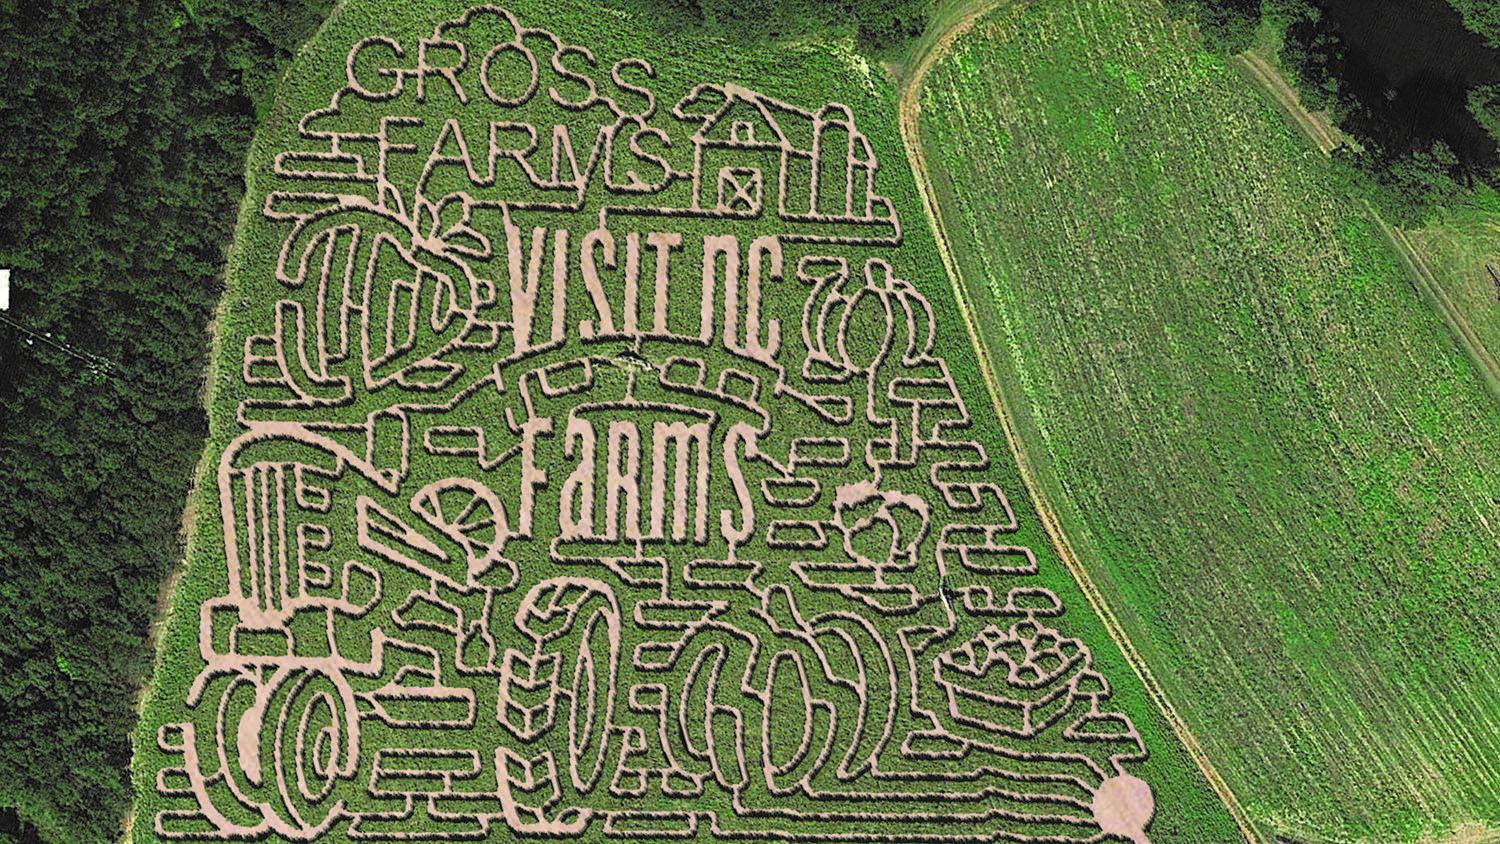 Aerial view of corn maze that says "Gross Farms" and "Visit NC Farms"